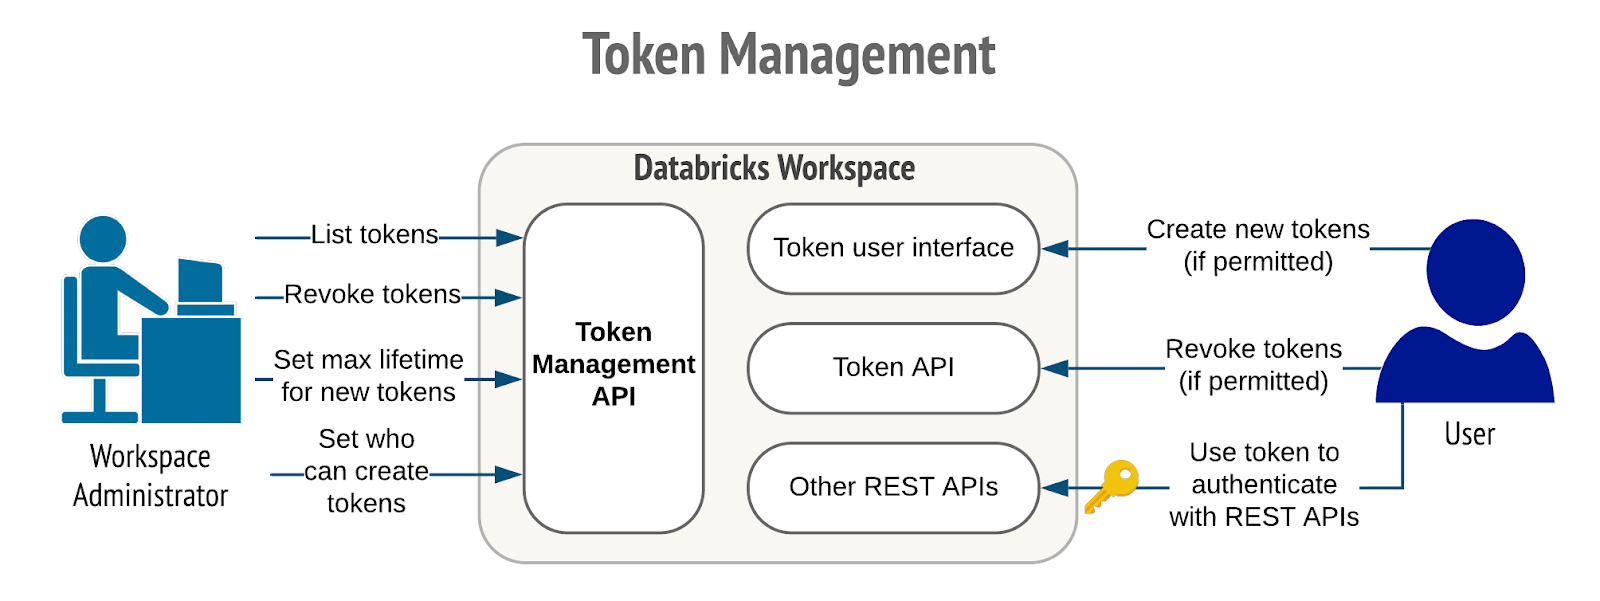 The control and management of token creation made possible by Azure Databricks reduces the risk of lost tokens or long-lasting tokens that could lead to data exfiltration from the workspace.